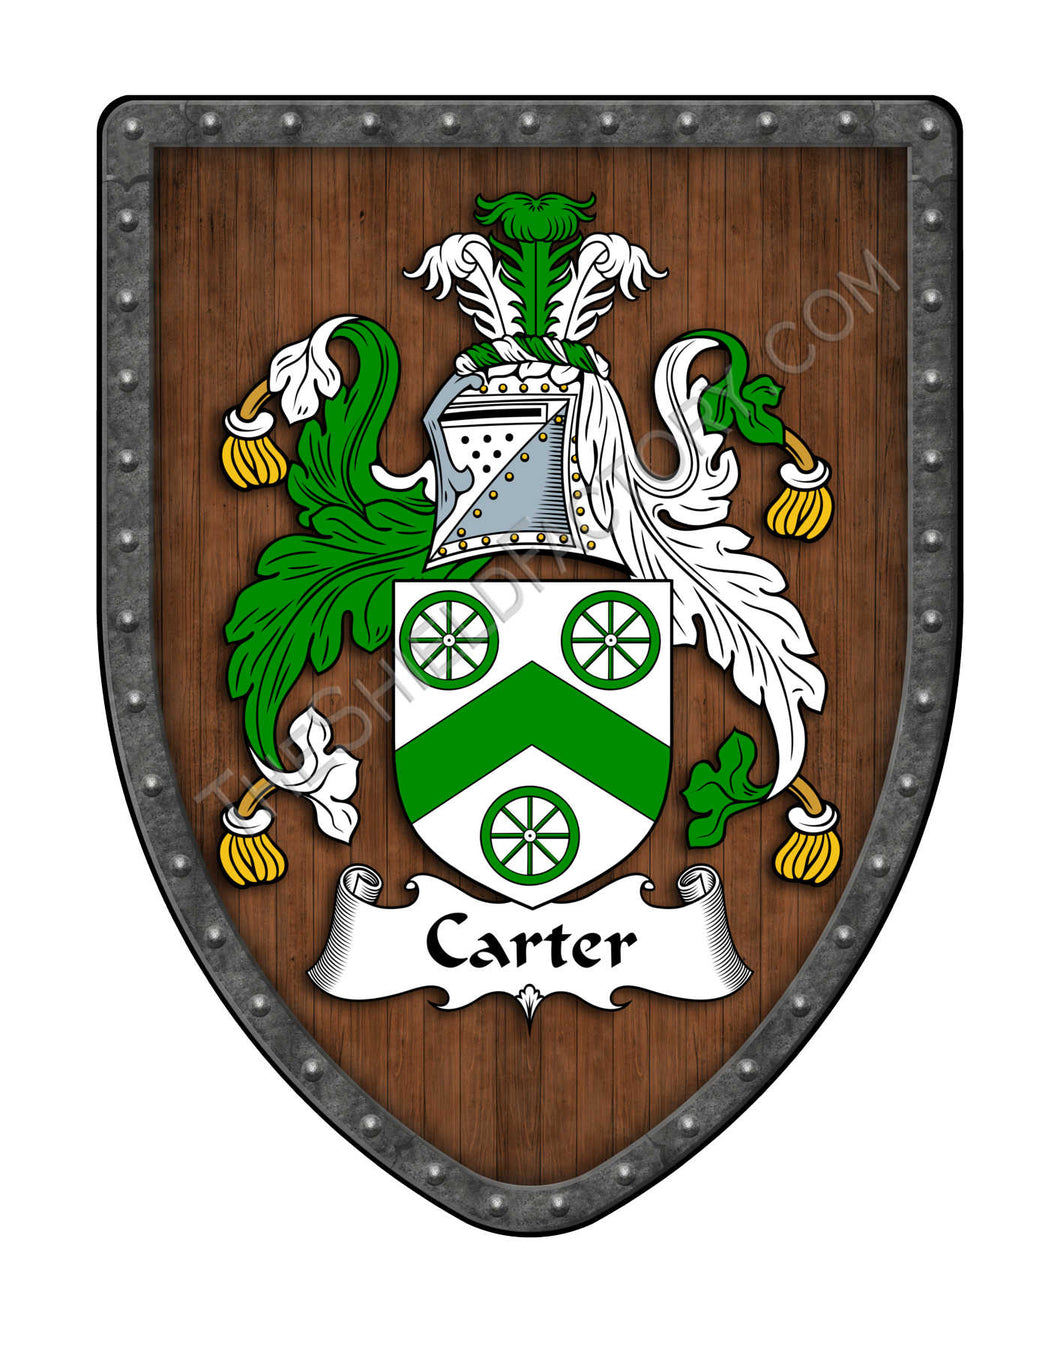 Carter Coat of Arms Family Crest Shield